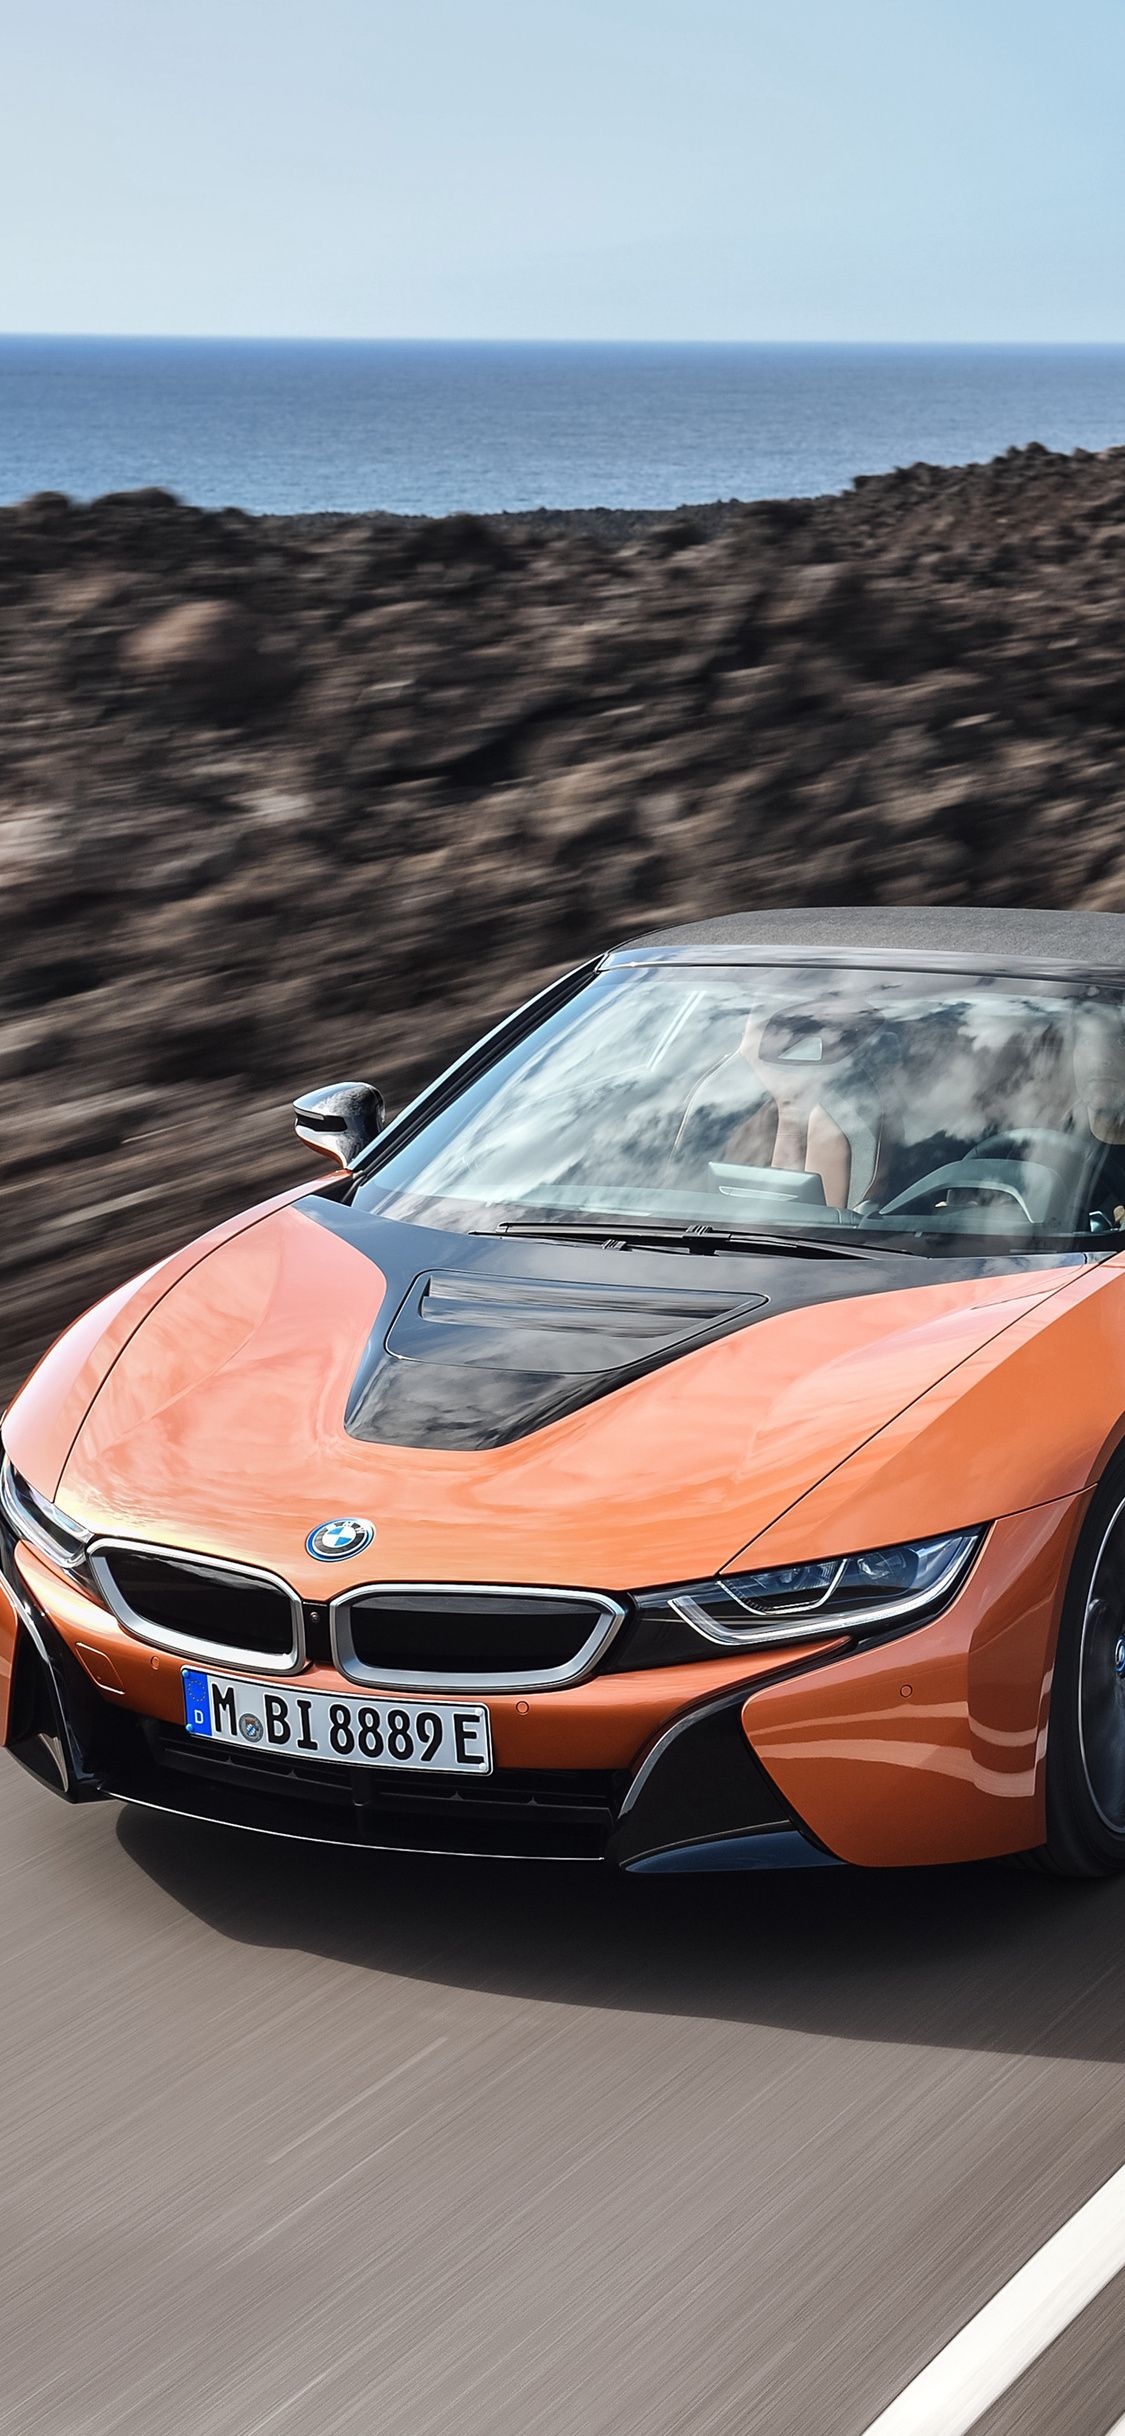 Bmw I8 Roadster iPhone XS, iPhone iPhone X HD 4k Wallpaper, Image, Background, Photo and Picture